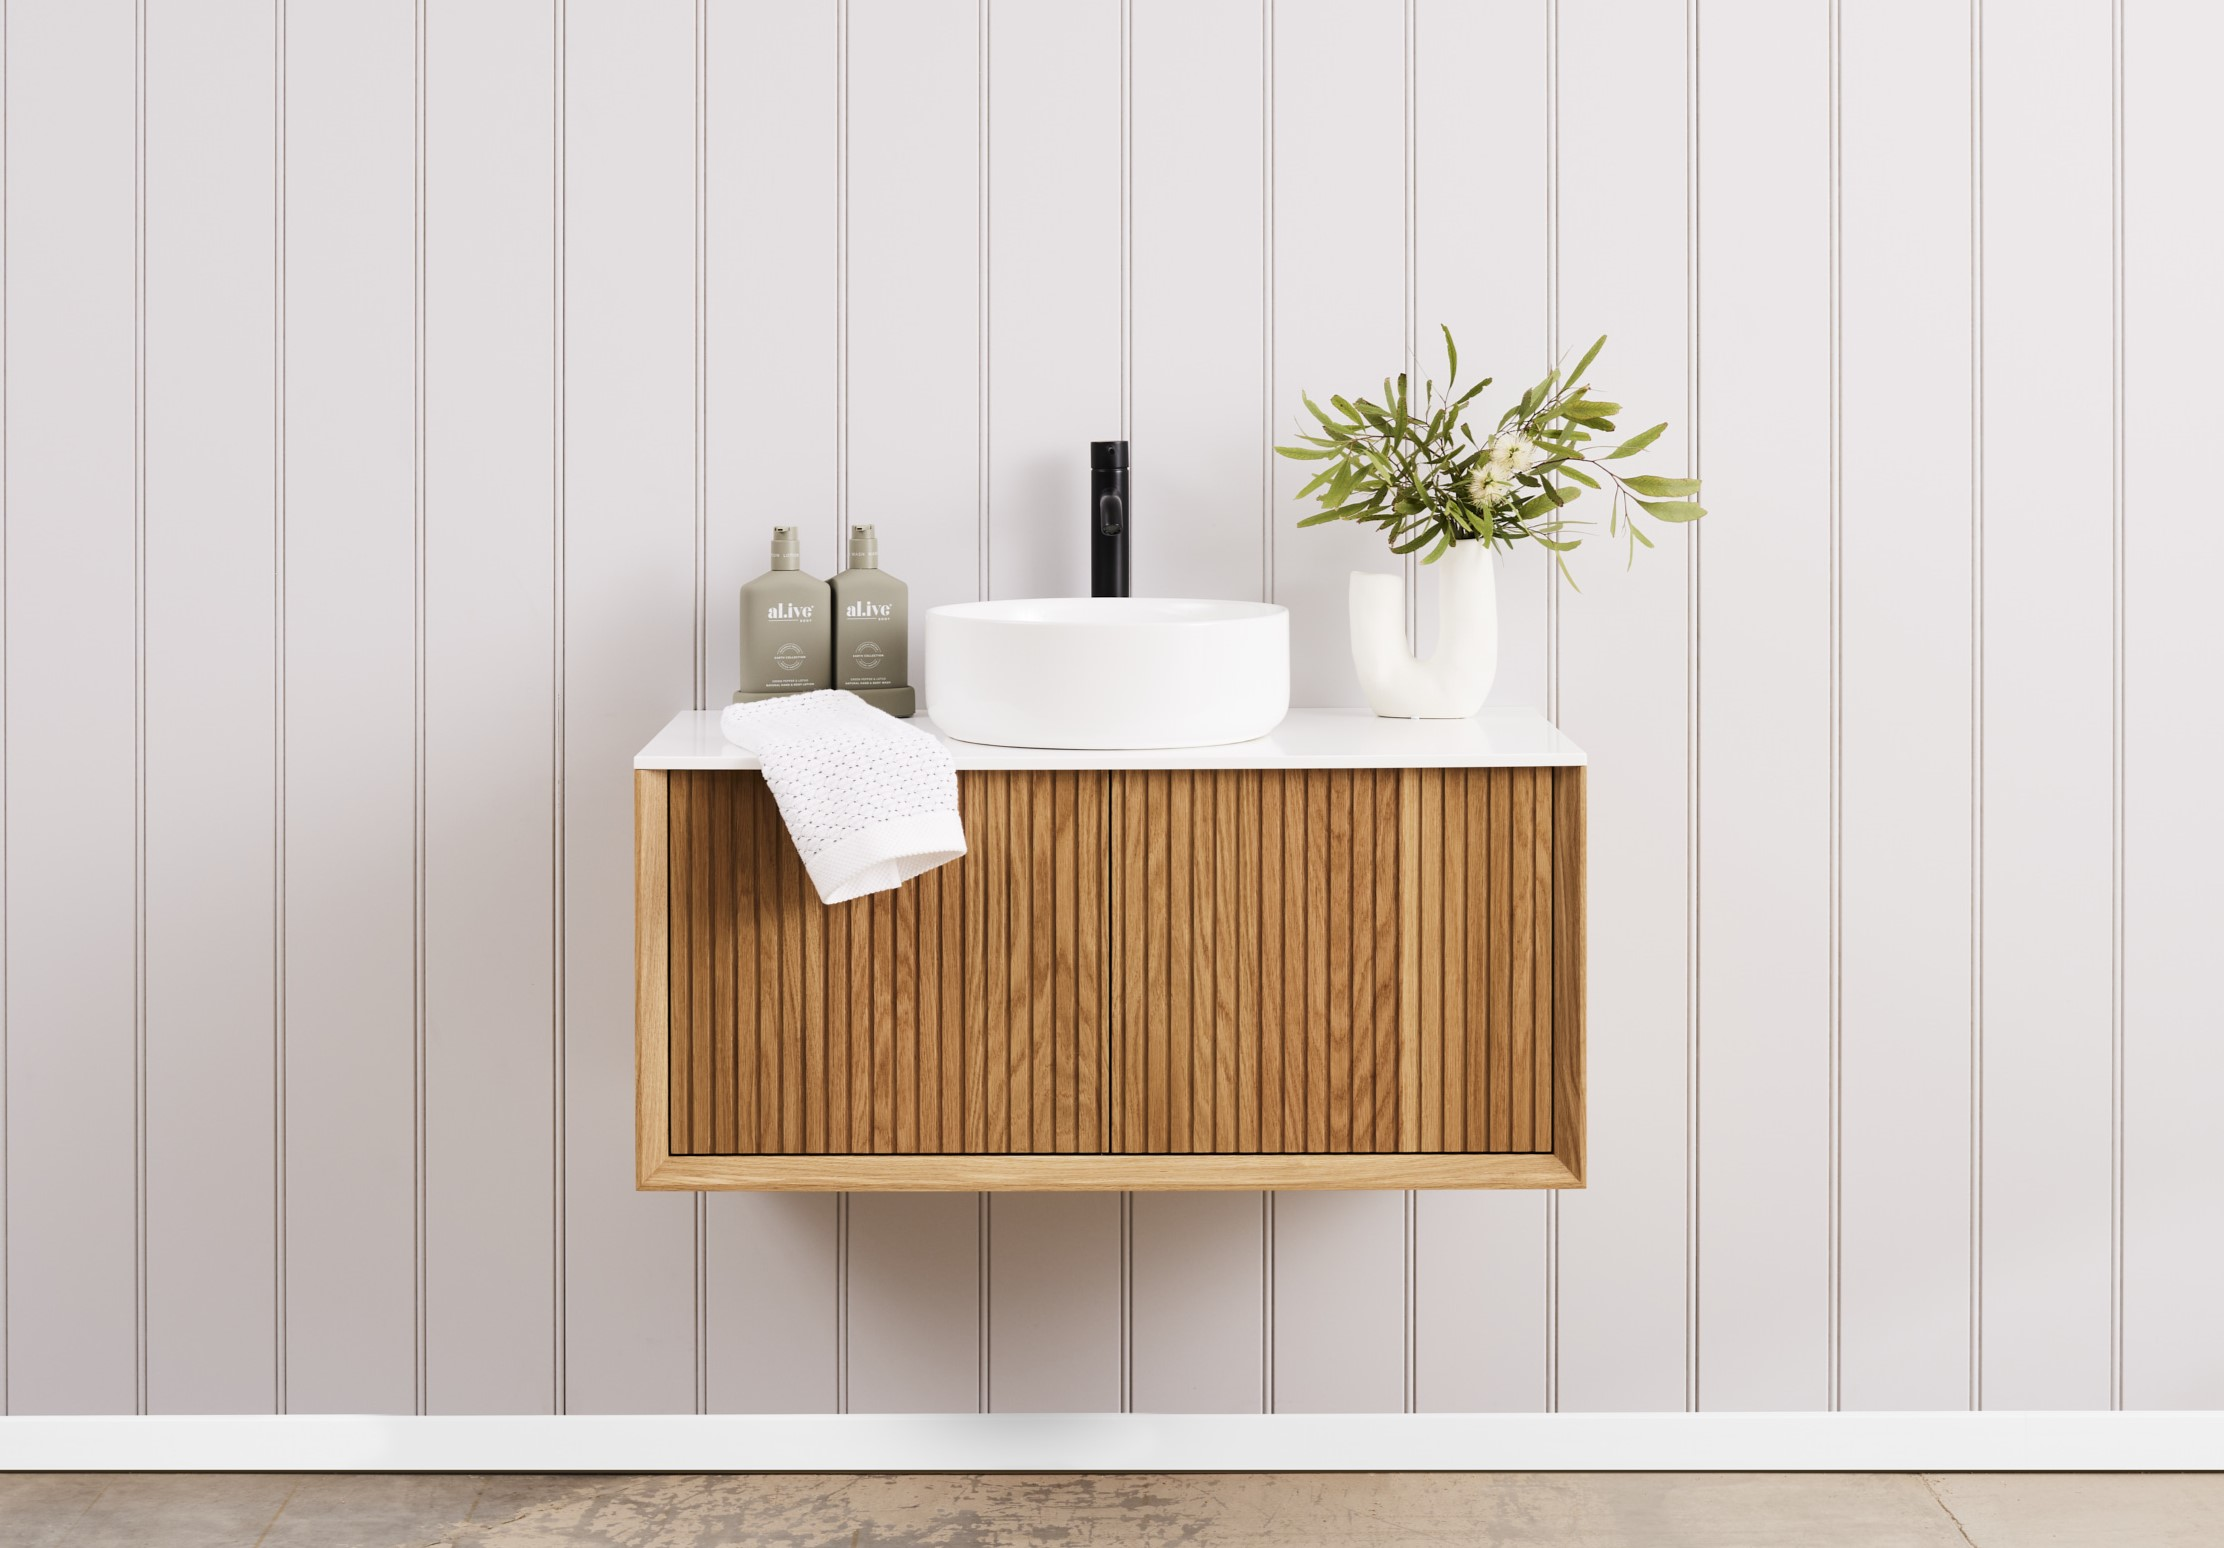 A timber vanity with a natural oil finish in a bathroom